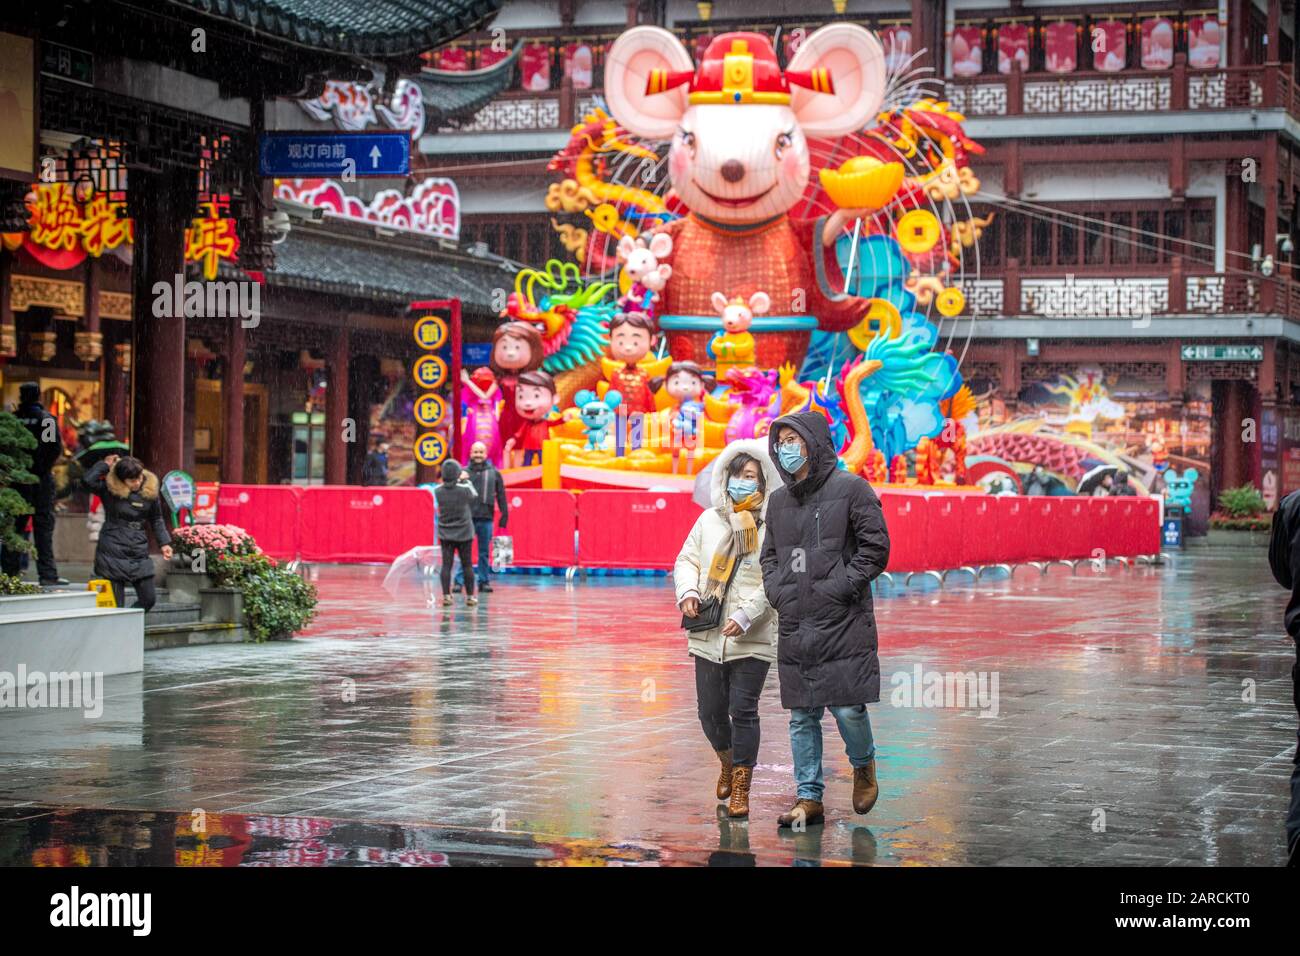 Shanghai, China, 25th Jan 2020, A woman and man in masks walks with Chinese New Year celebration reminders around them Stock Photo